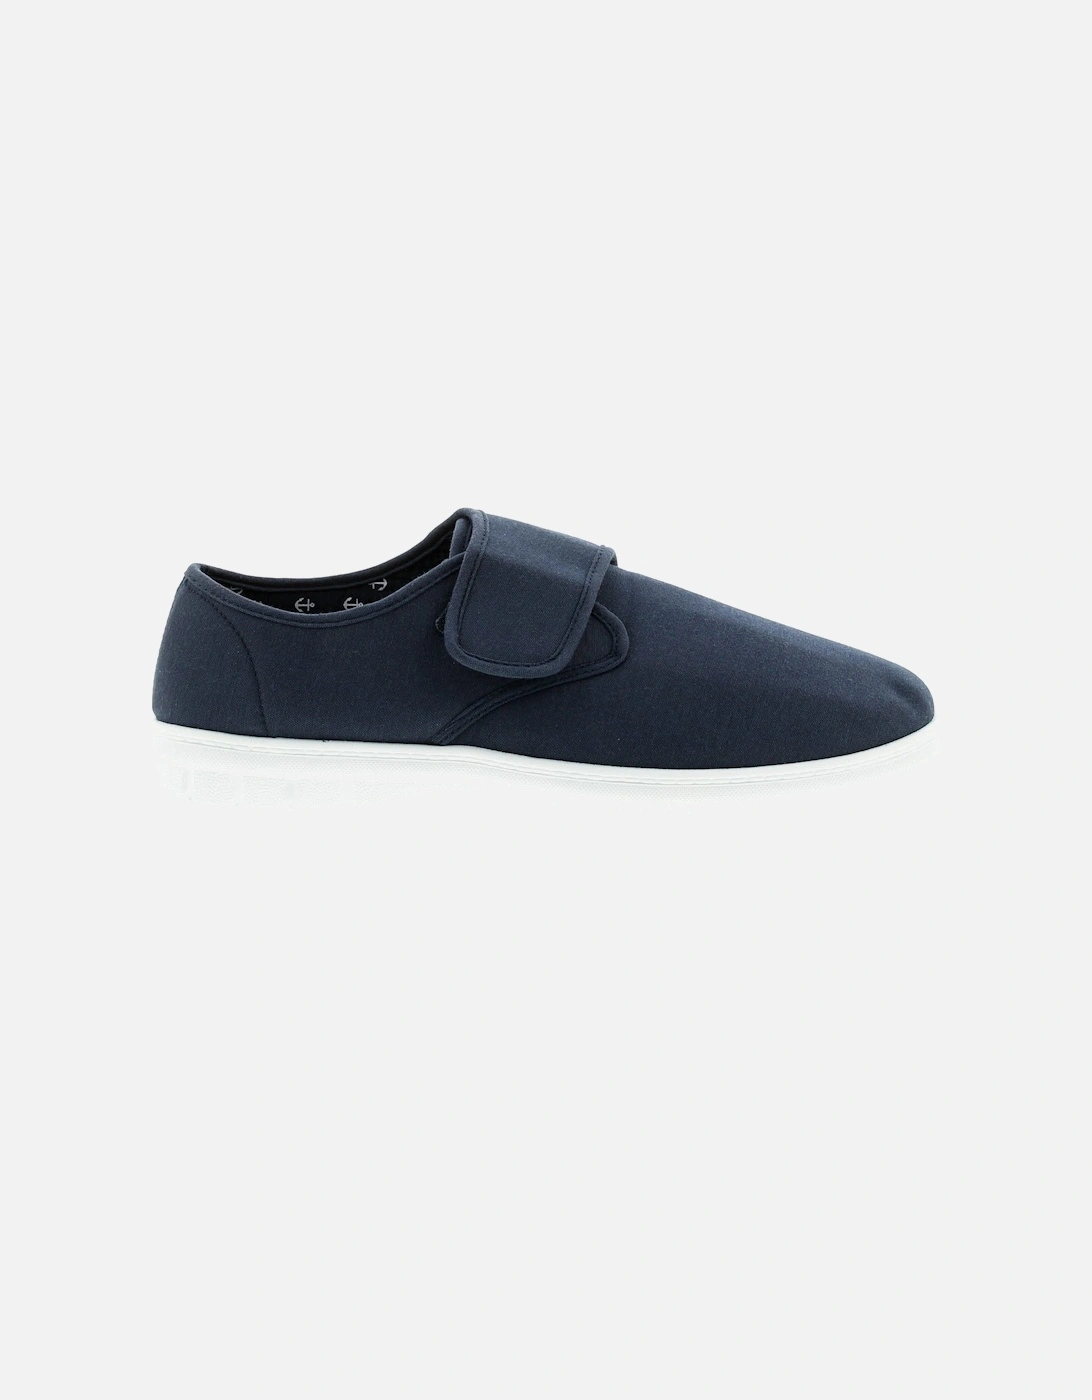 Mens Shoes Canvas Ernie Touch Fastening navy UK Size